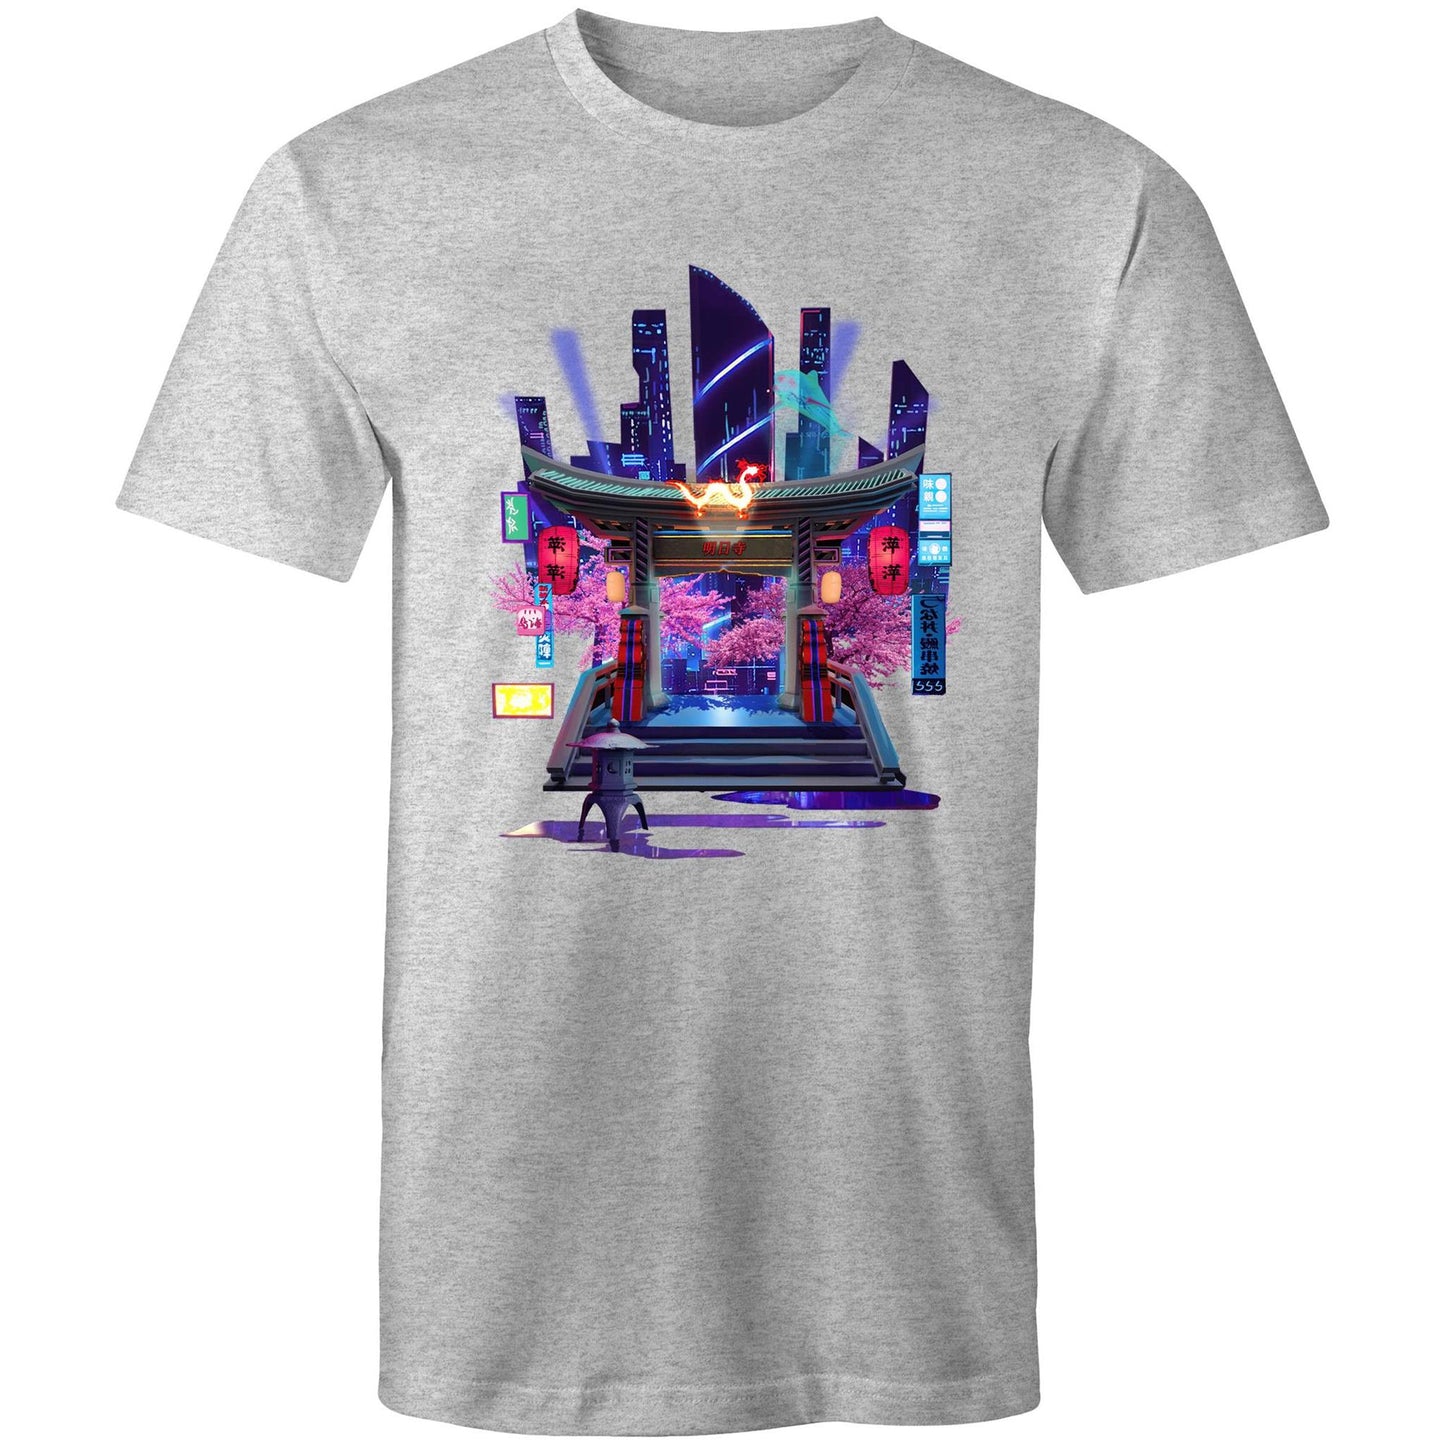 Cyber: Temple - T-shirt